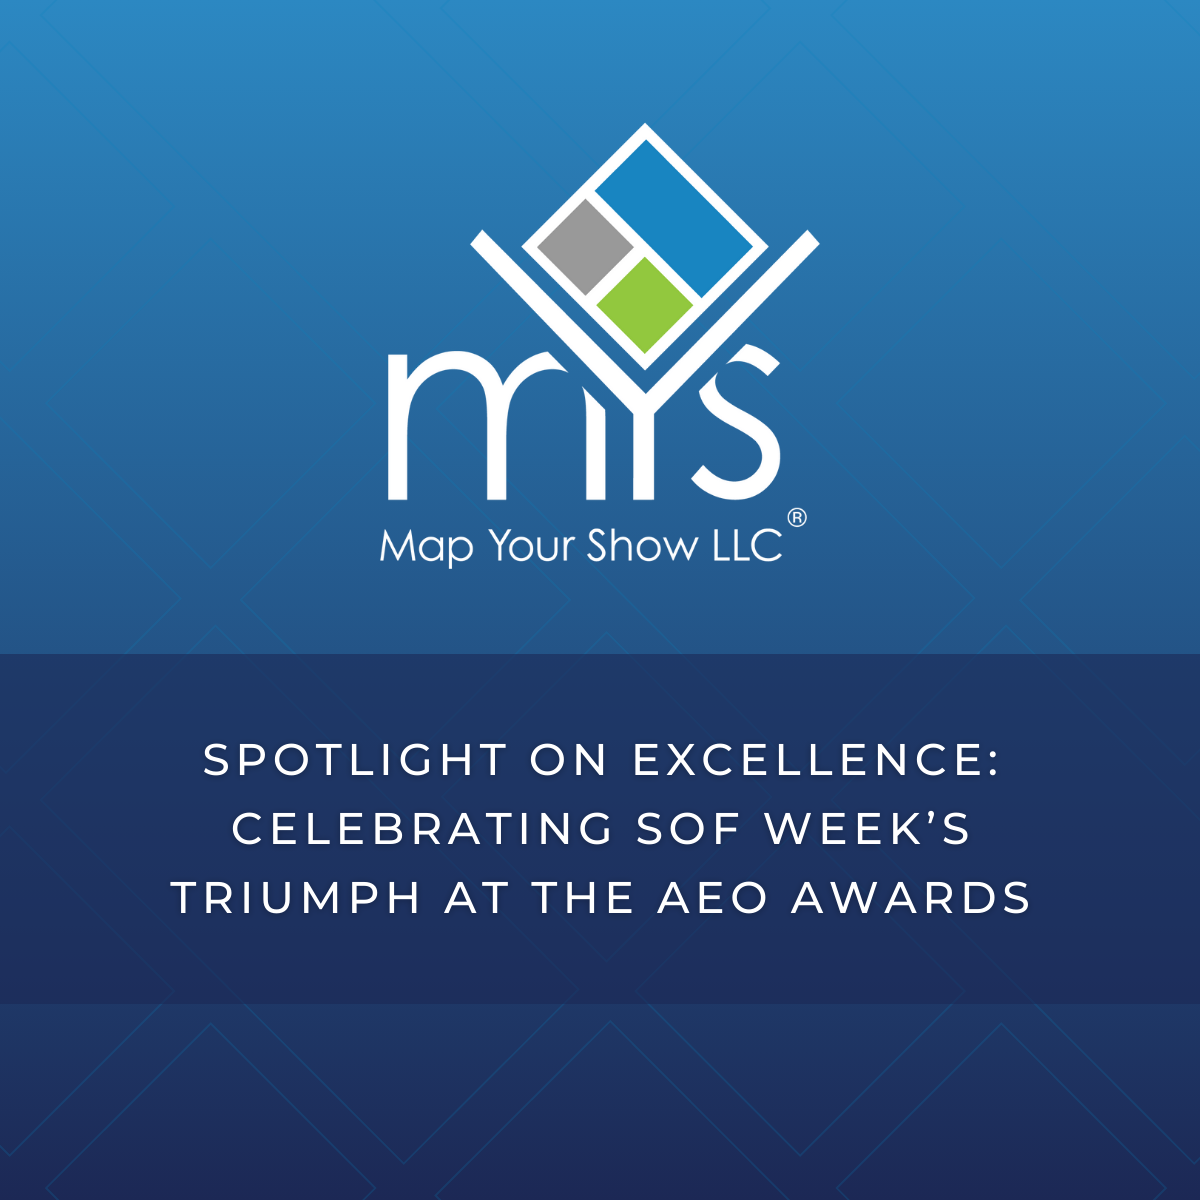 Spotlight on Excellence: Celebrating SOF Week’s Triumph at the Association of Event Organizers’ Awards